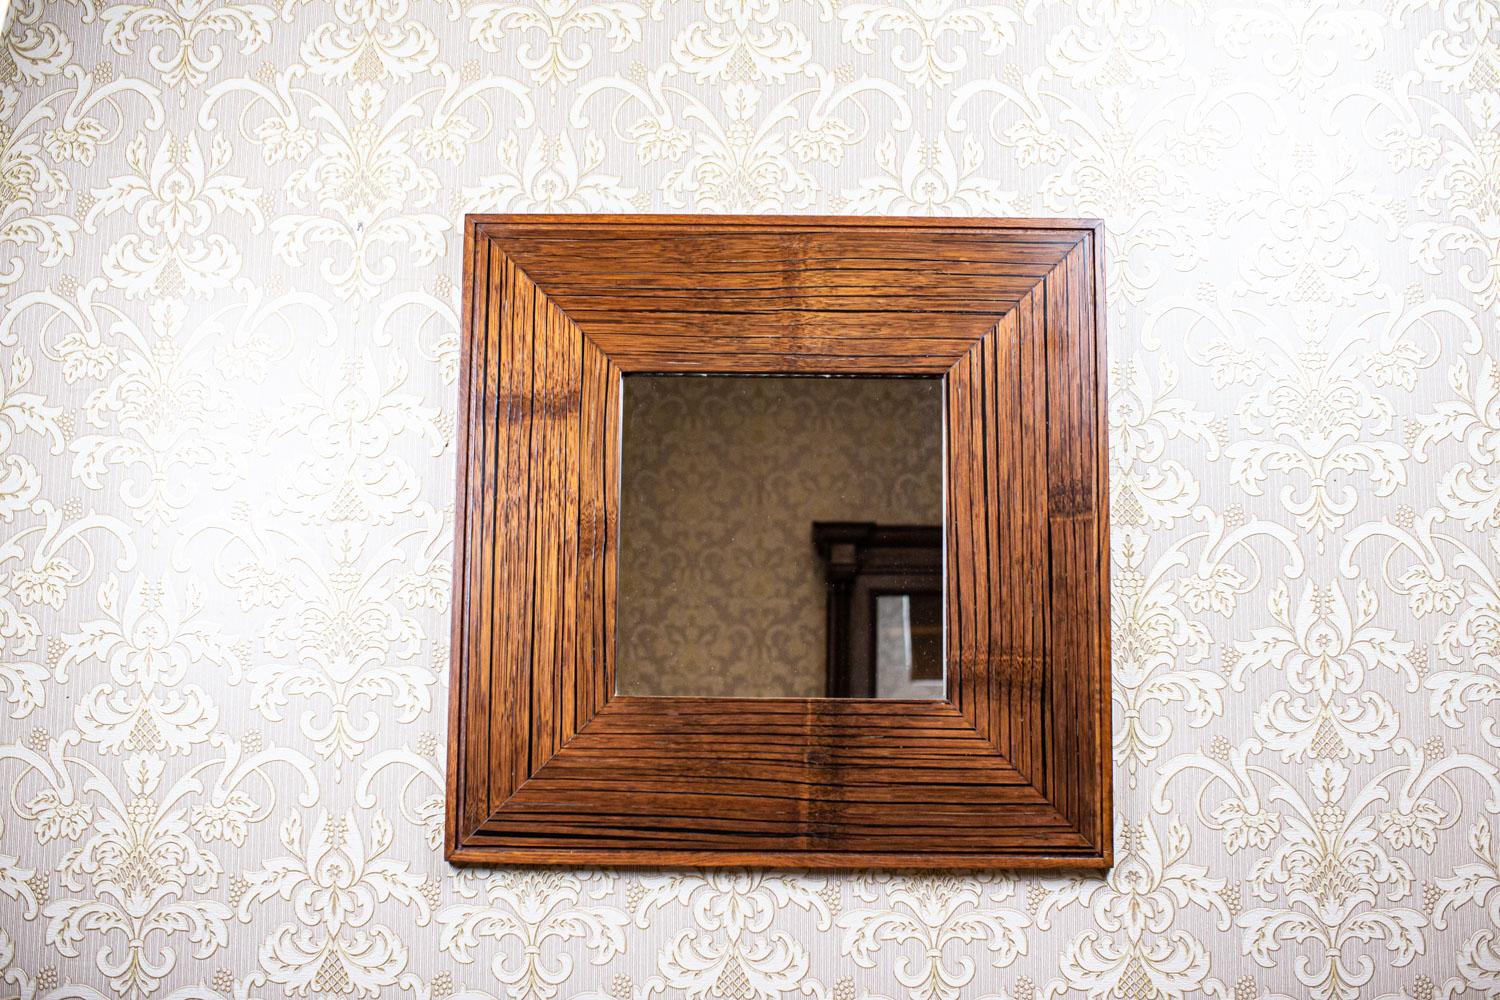 20th-Century Mirror in Original Square Frame of Exotic Wood

We present you a mirror of a simple form in an original square frame.
The frame is made of exotic wood – its origin is contemporary.

This item is in particularly good condition.